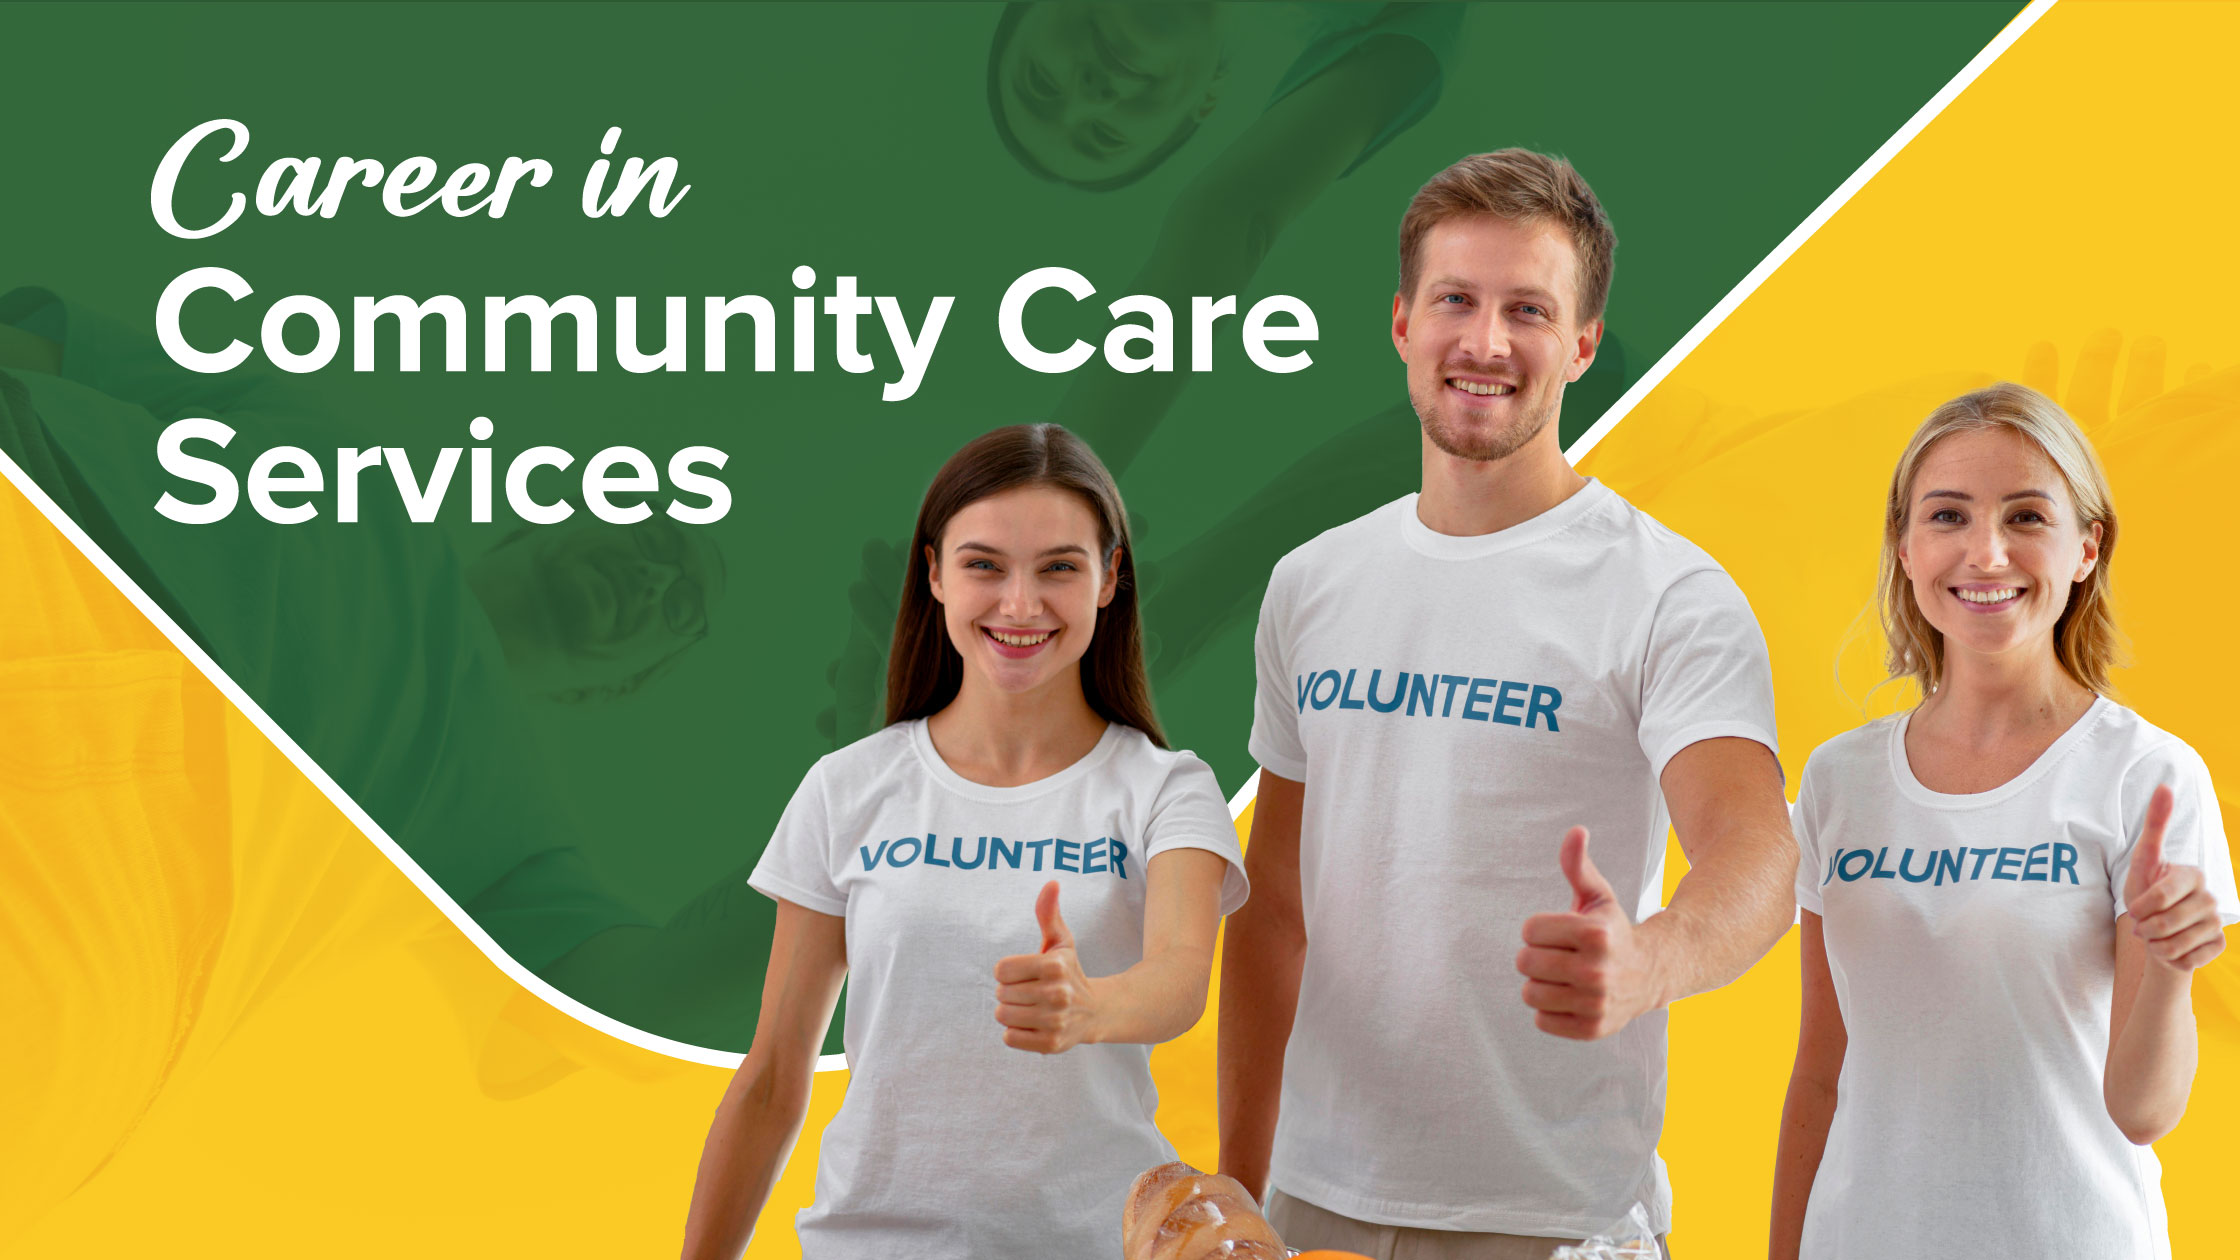 A Career in Community Care Services: What’s It Like